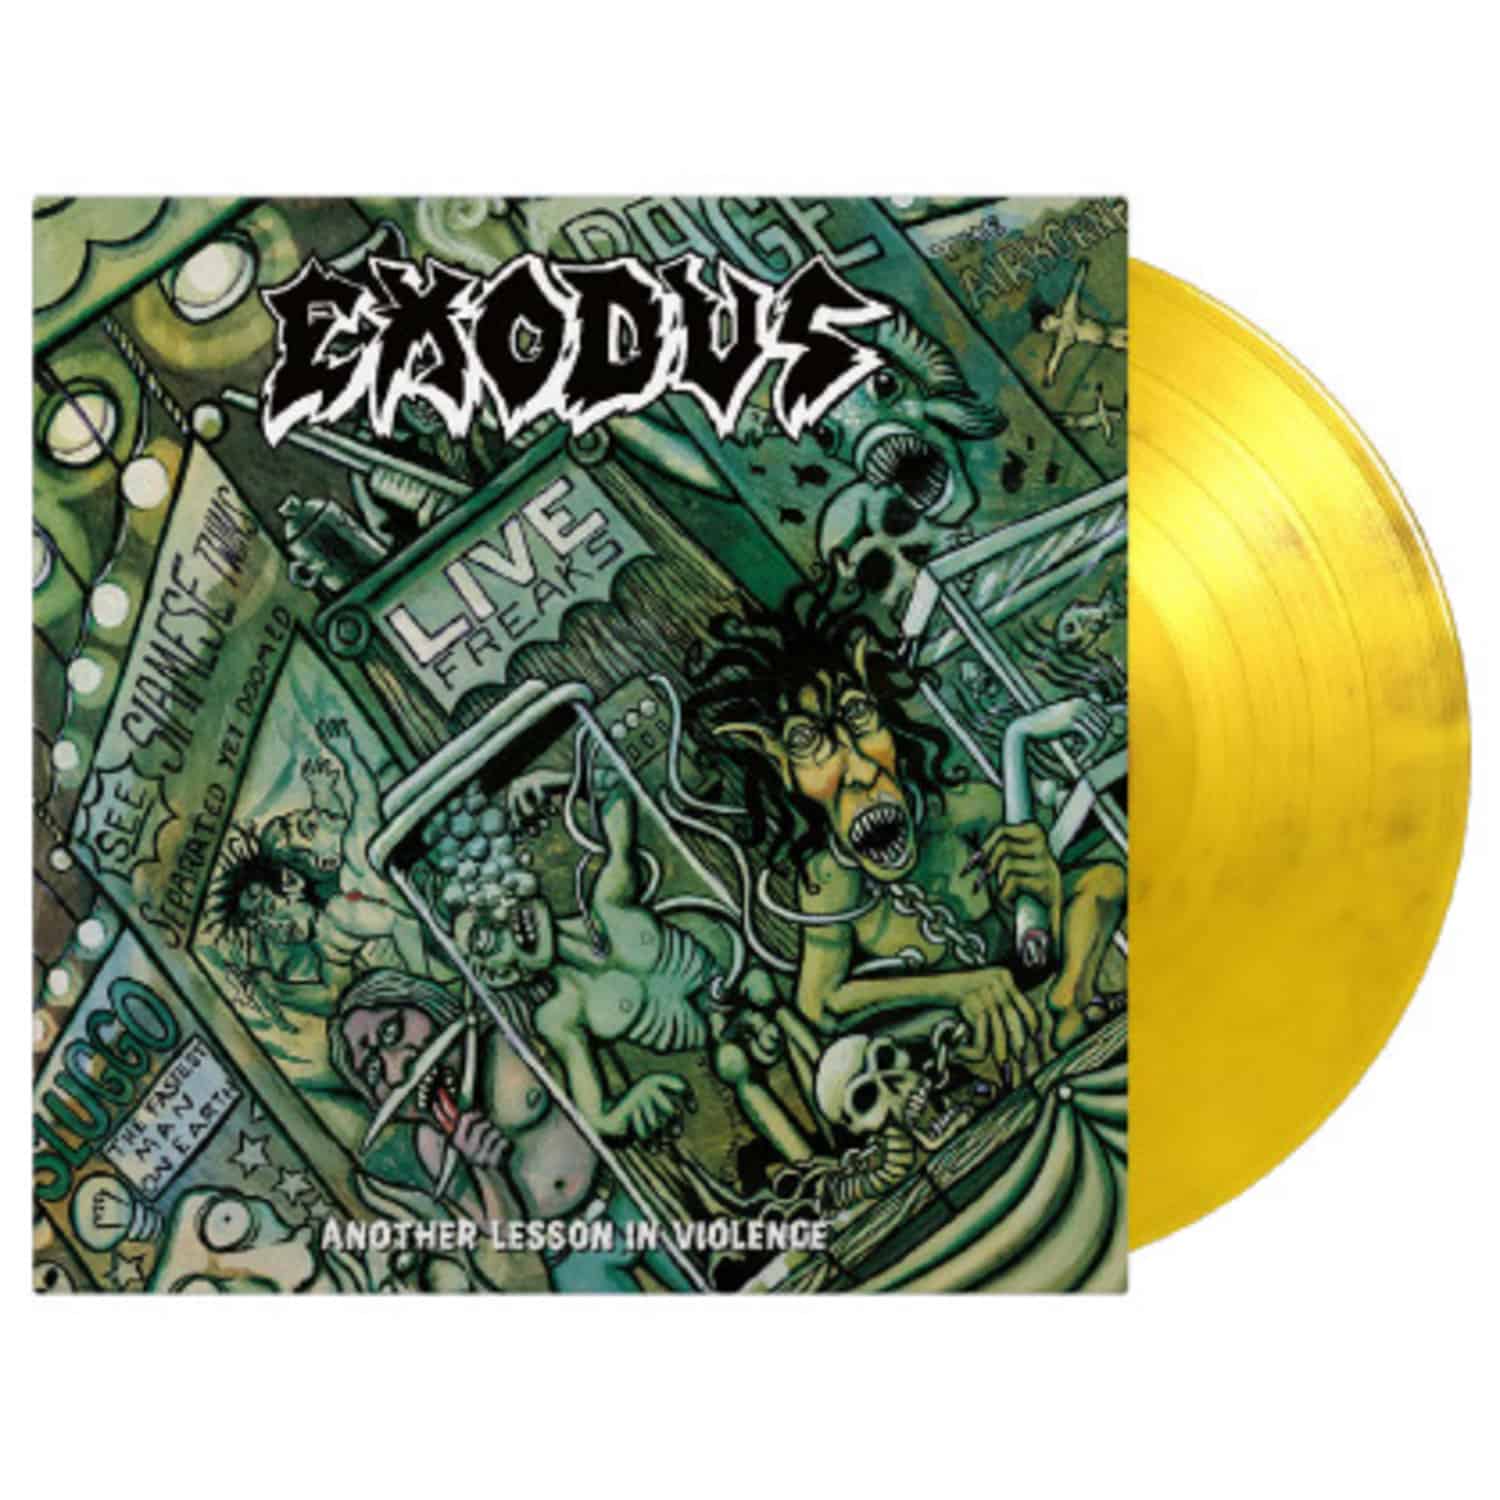 Exodus - ANOTHER LESSON IN VIOLENCE 